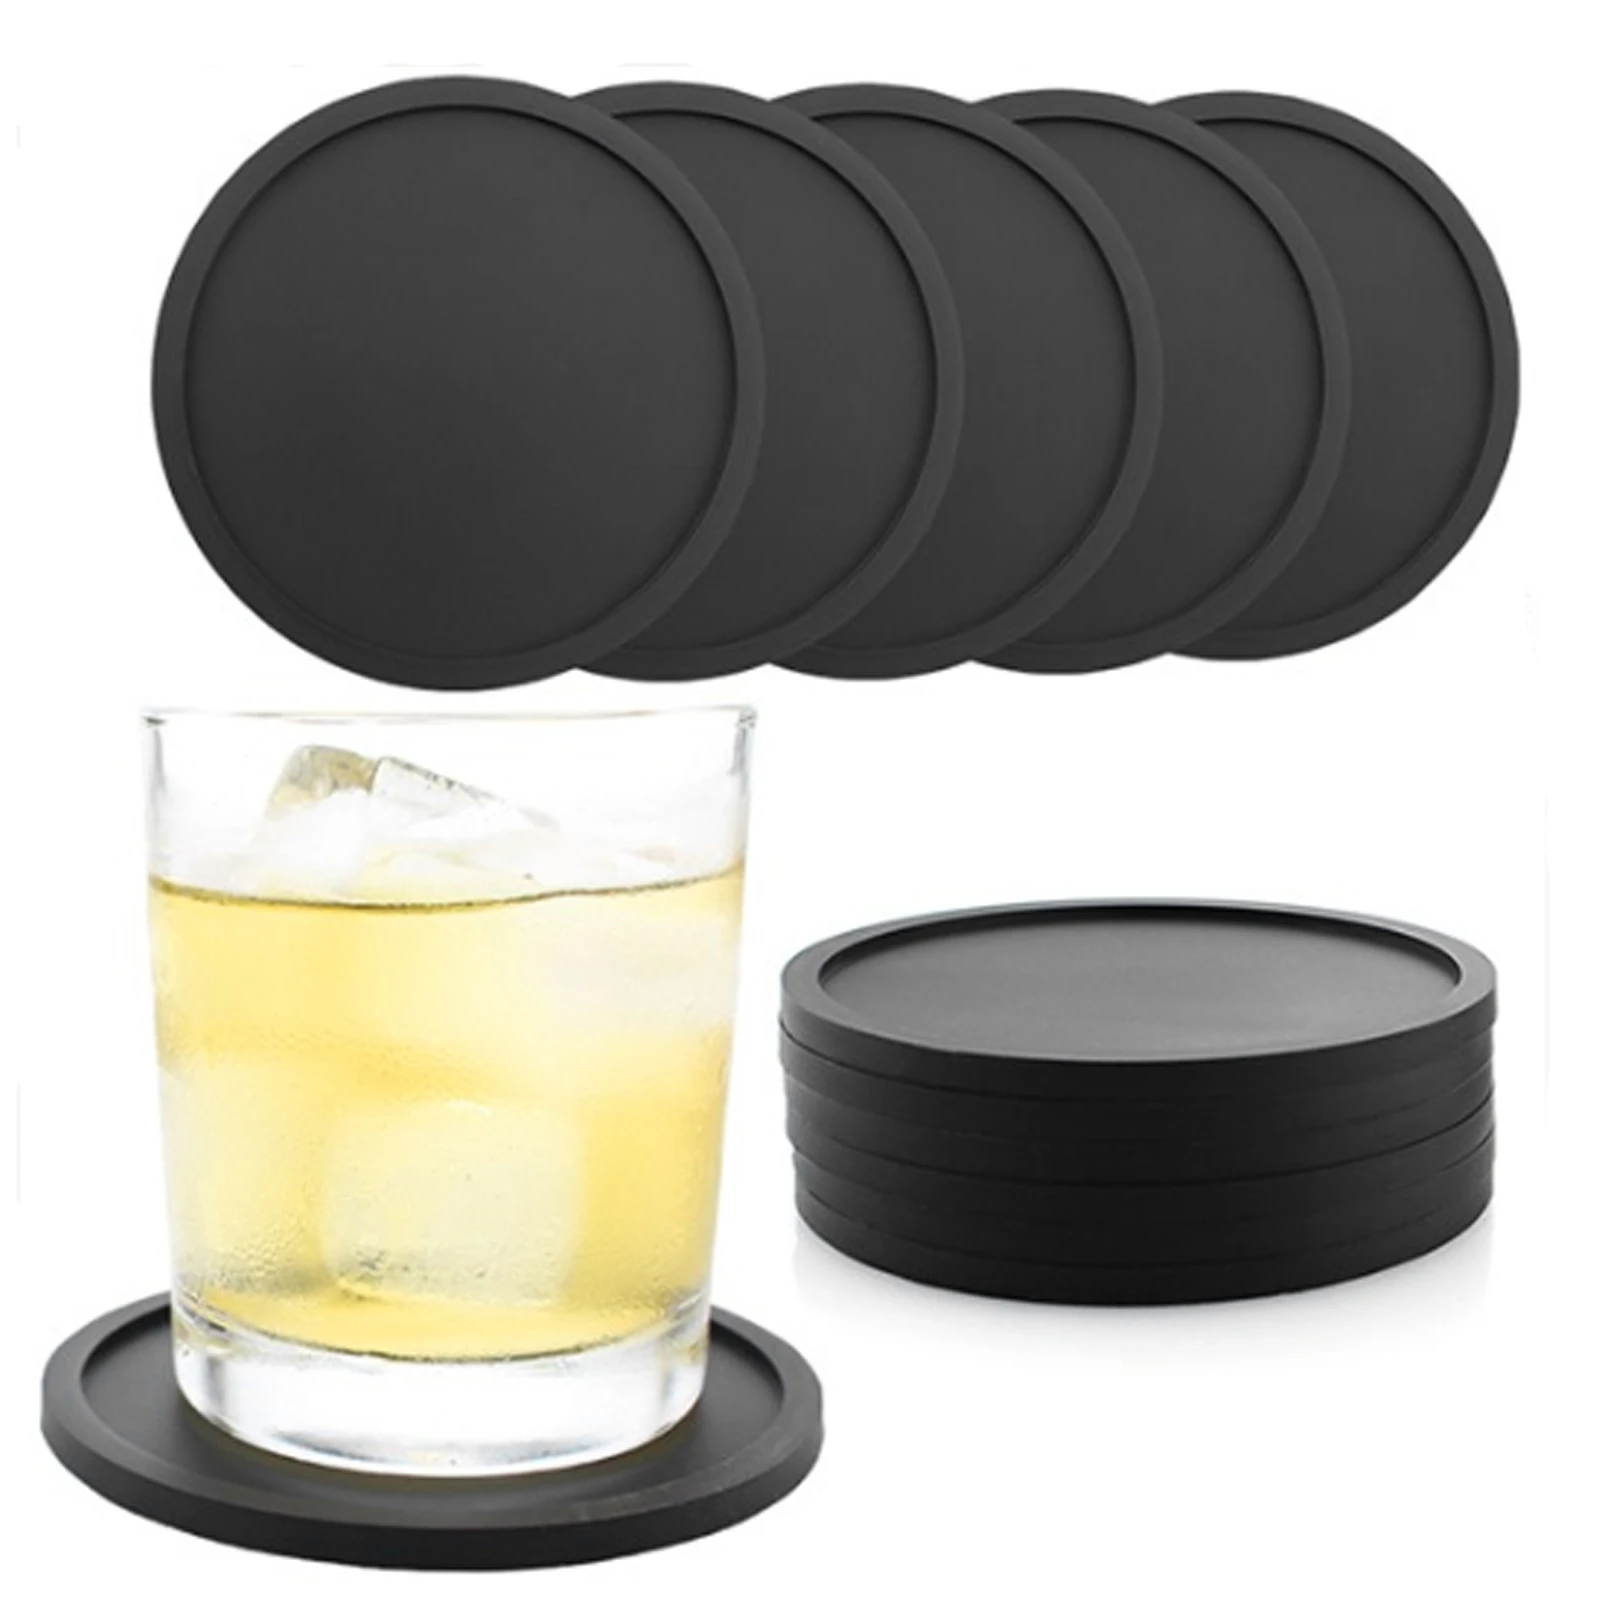 4pcs In a Set w/ Holder for Any Cup Size Silicone Drink Coaster 